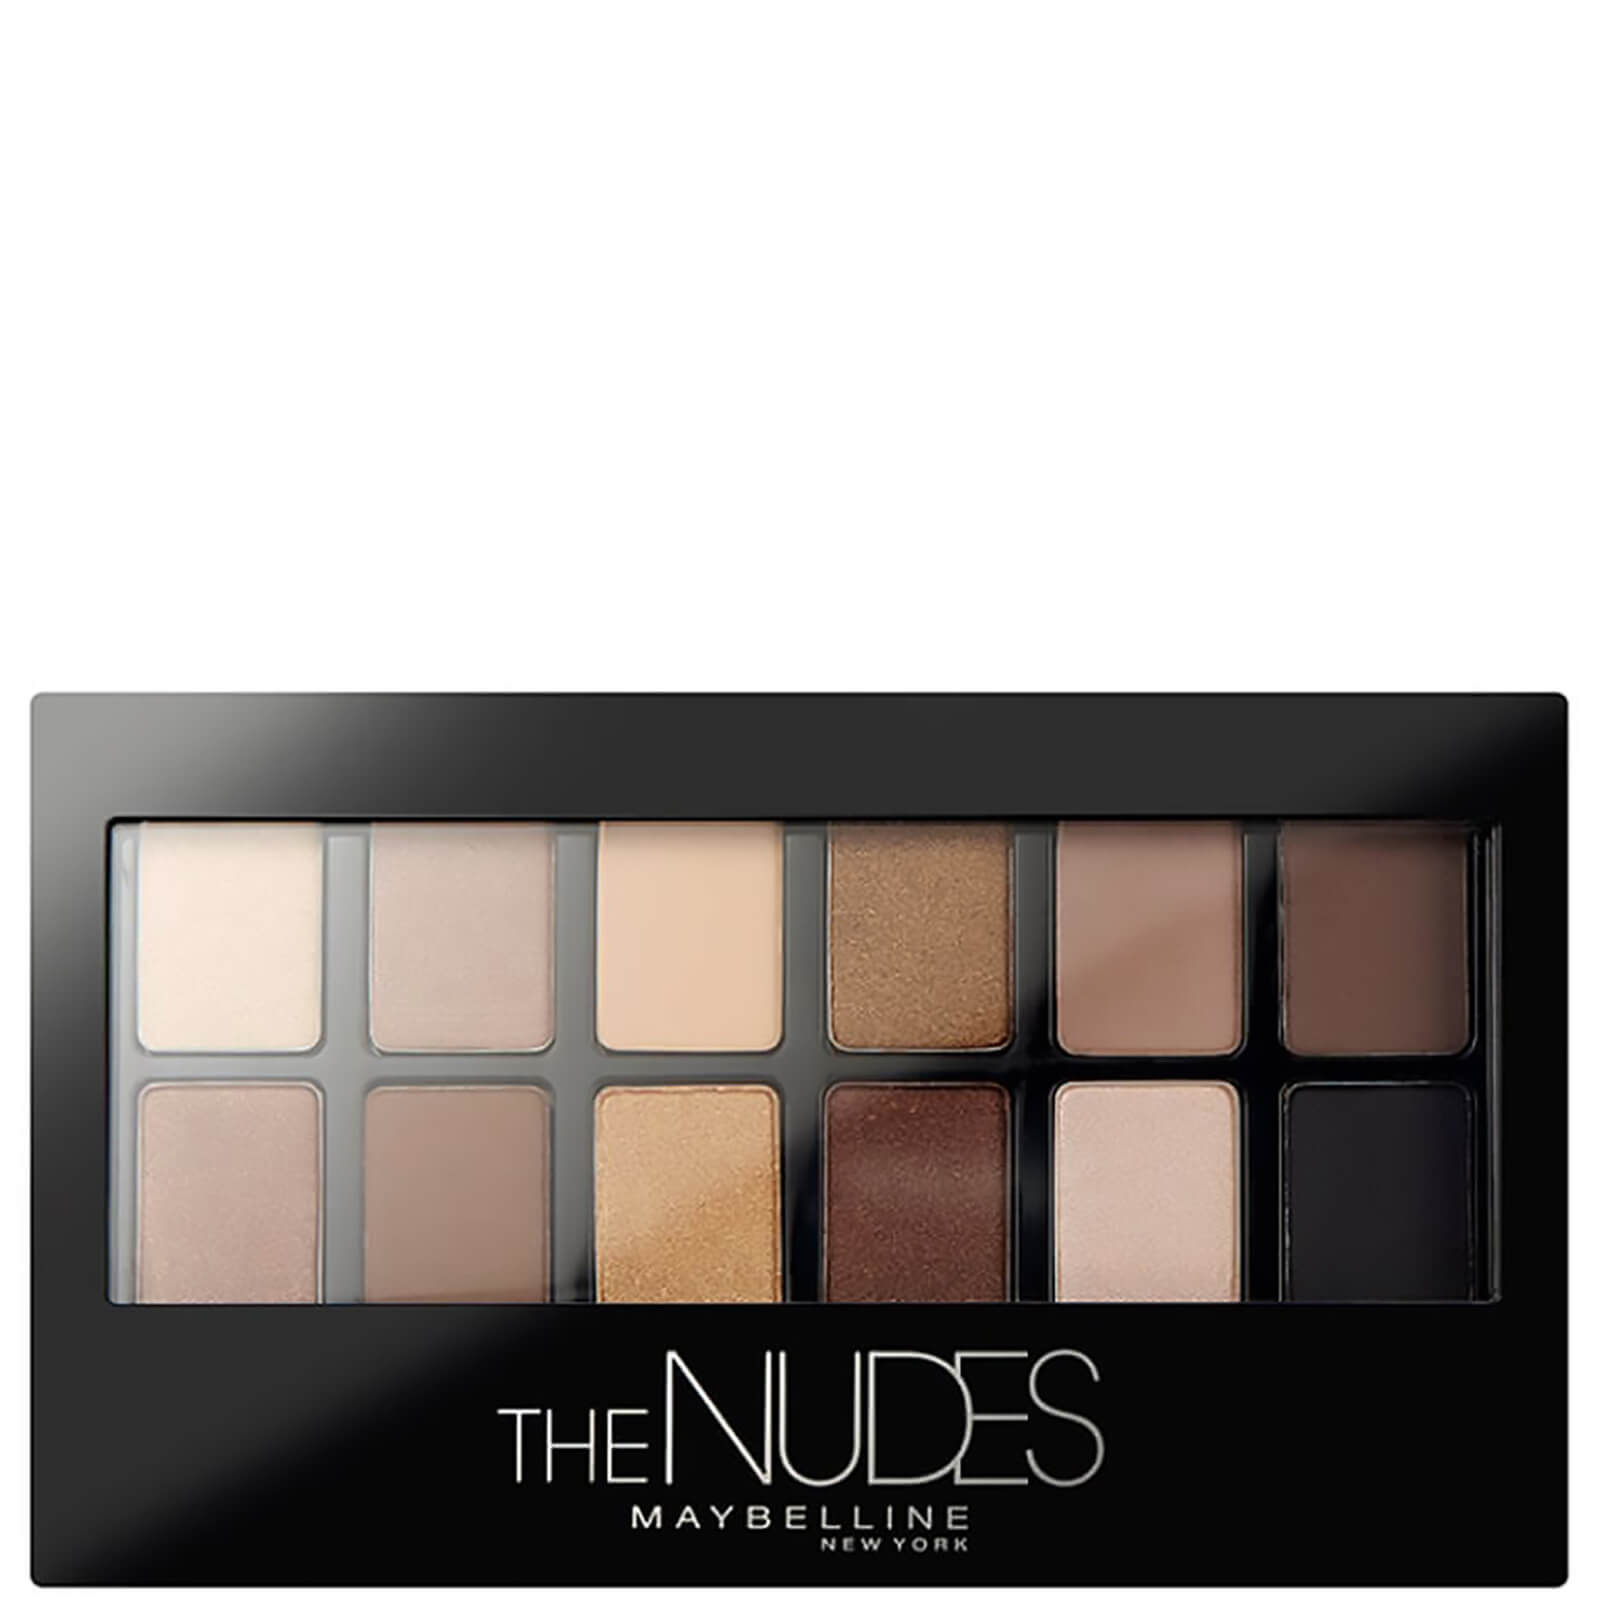 Image of Maybelline Eye Shadow Palette - The Nudes